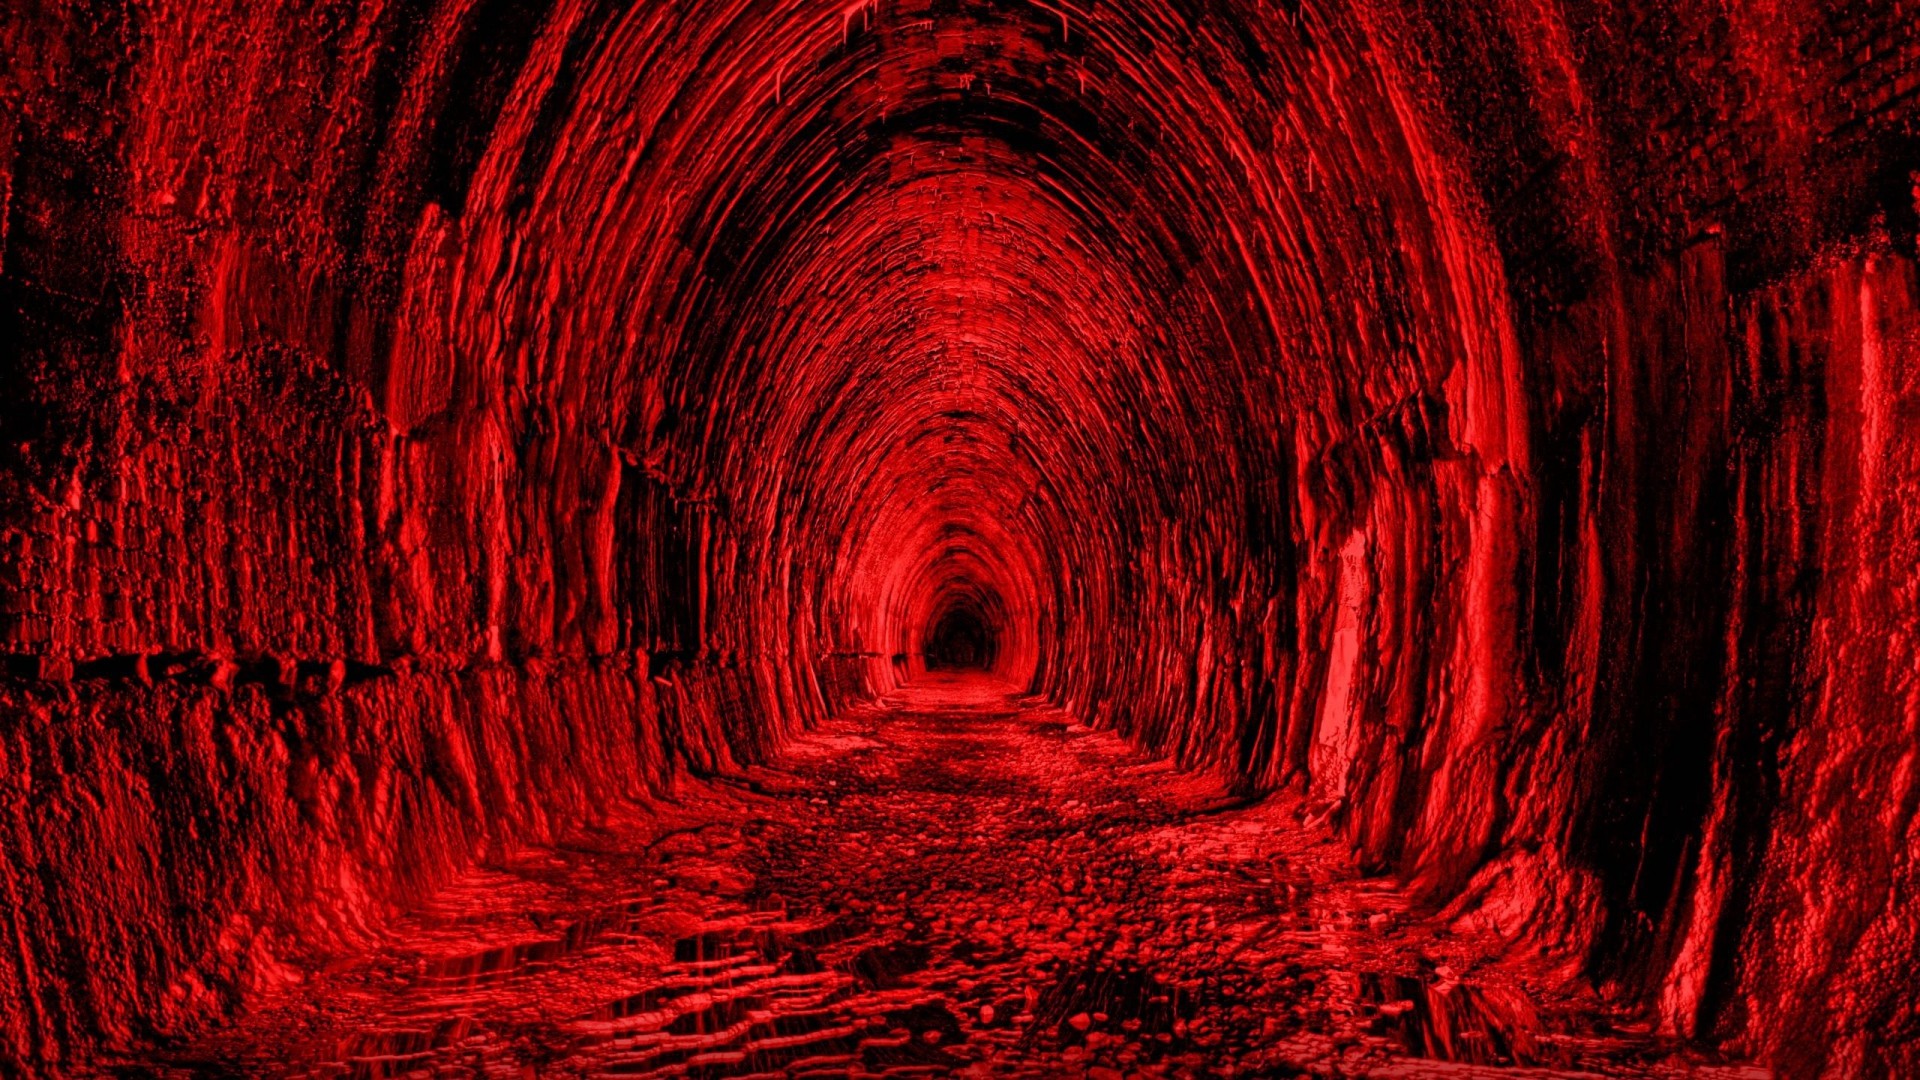 Dark Red Backgrounds - Wallpaper Cave